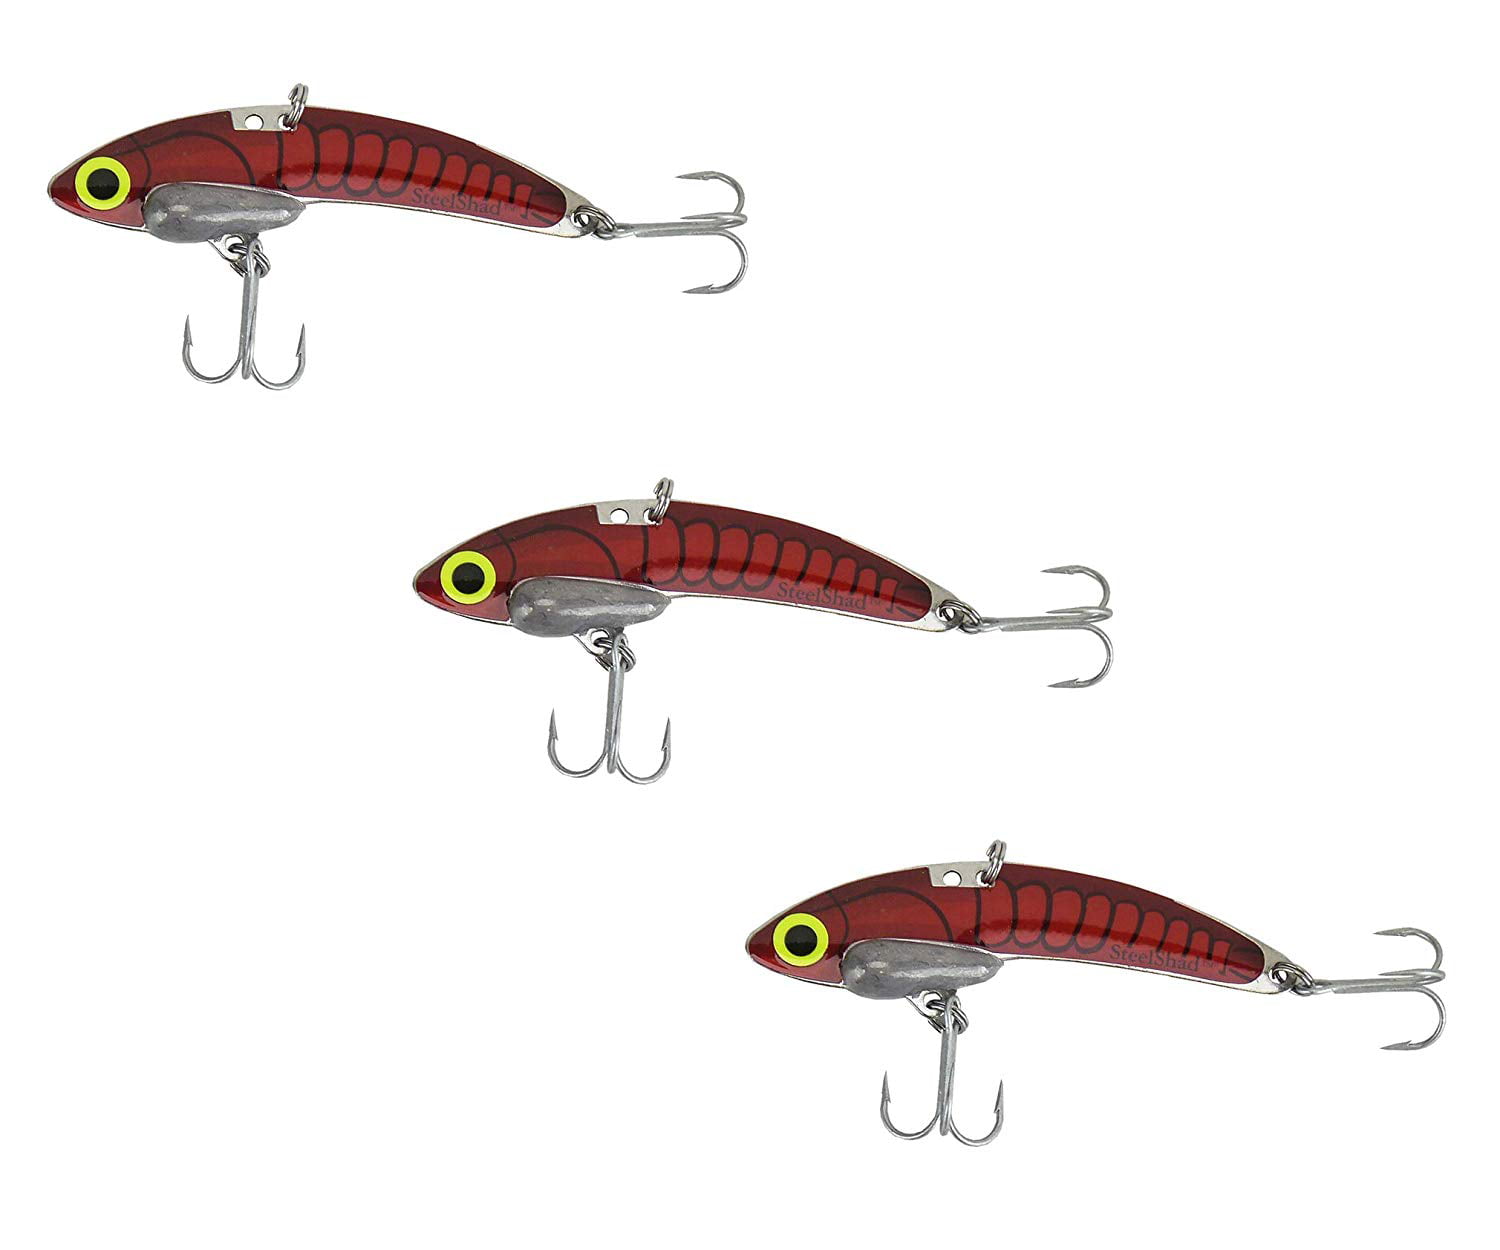 Walleye Trout Long Casting Bass Lure Perfect for Bass Original Series Pike Salmon and Striper - 3 Pack 3/8 oz Lipless Crankbait for Freshwater & Saltwater Fishing Musky SteelShad 